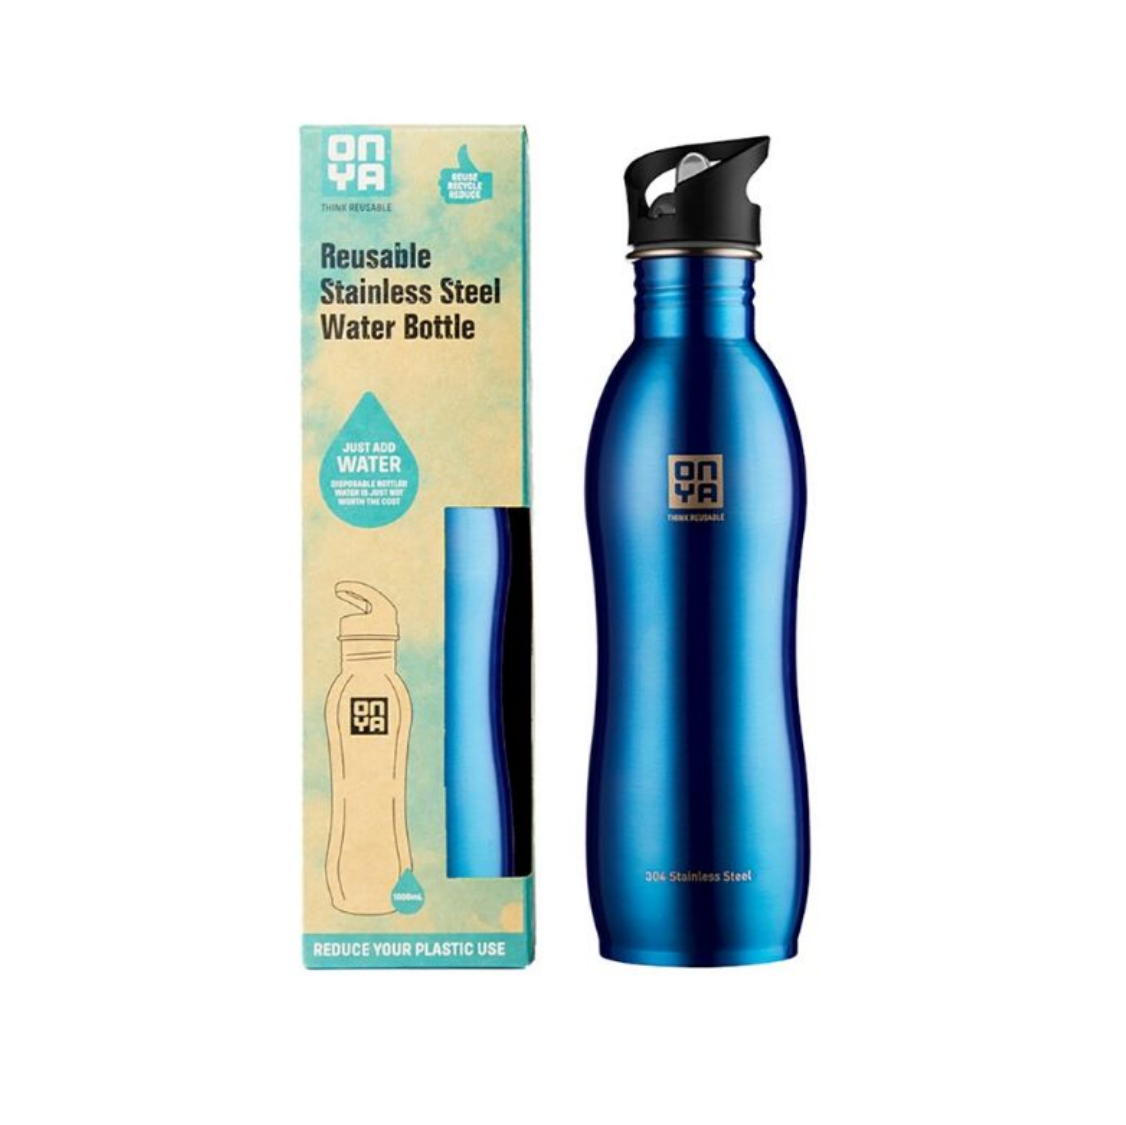 Reusable Stainless Steel Waterbottle